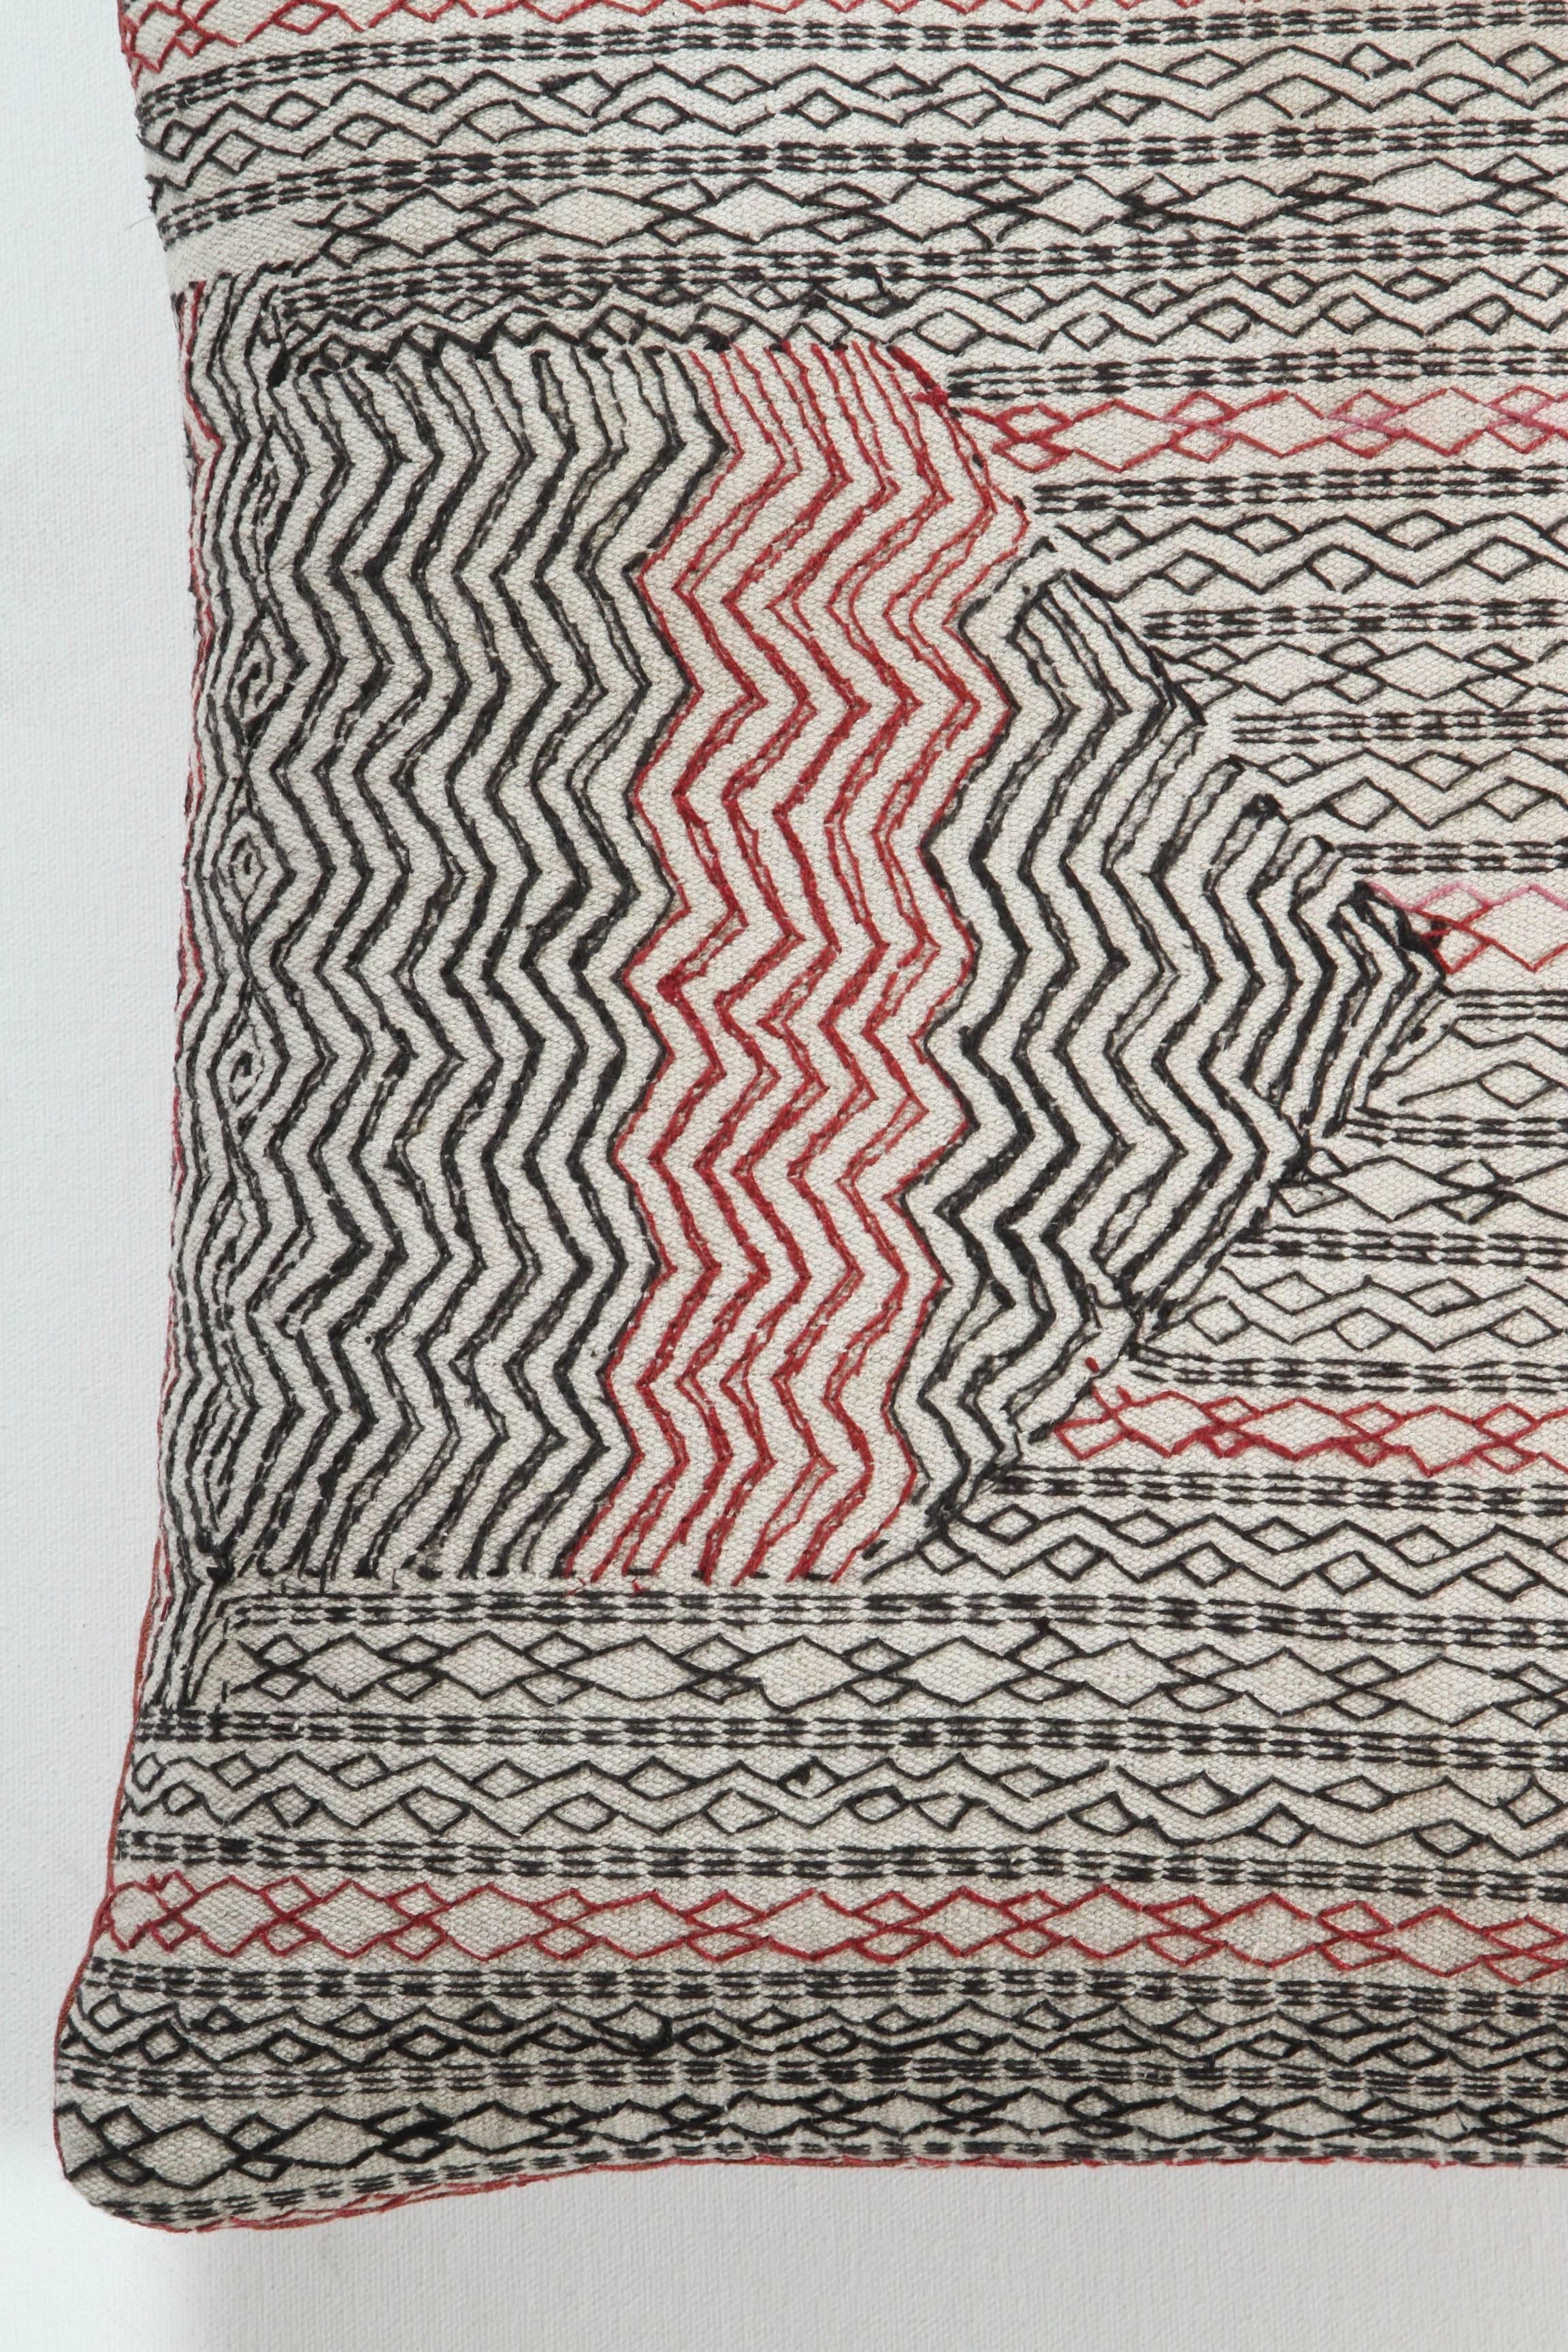 Vintage cotton on cotton embroidery producing a heavy quilted effect. Shades of black and white and (red). Zig zag and geometric striped Vintage cotton on cotton embroidery producing a heavy quilted effect. Shades of black, white and red. Zig zag